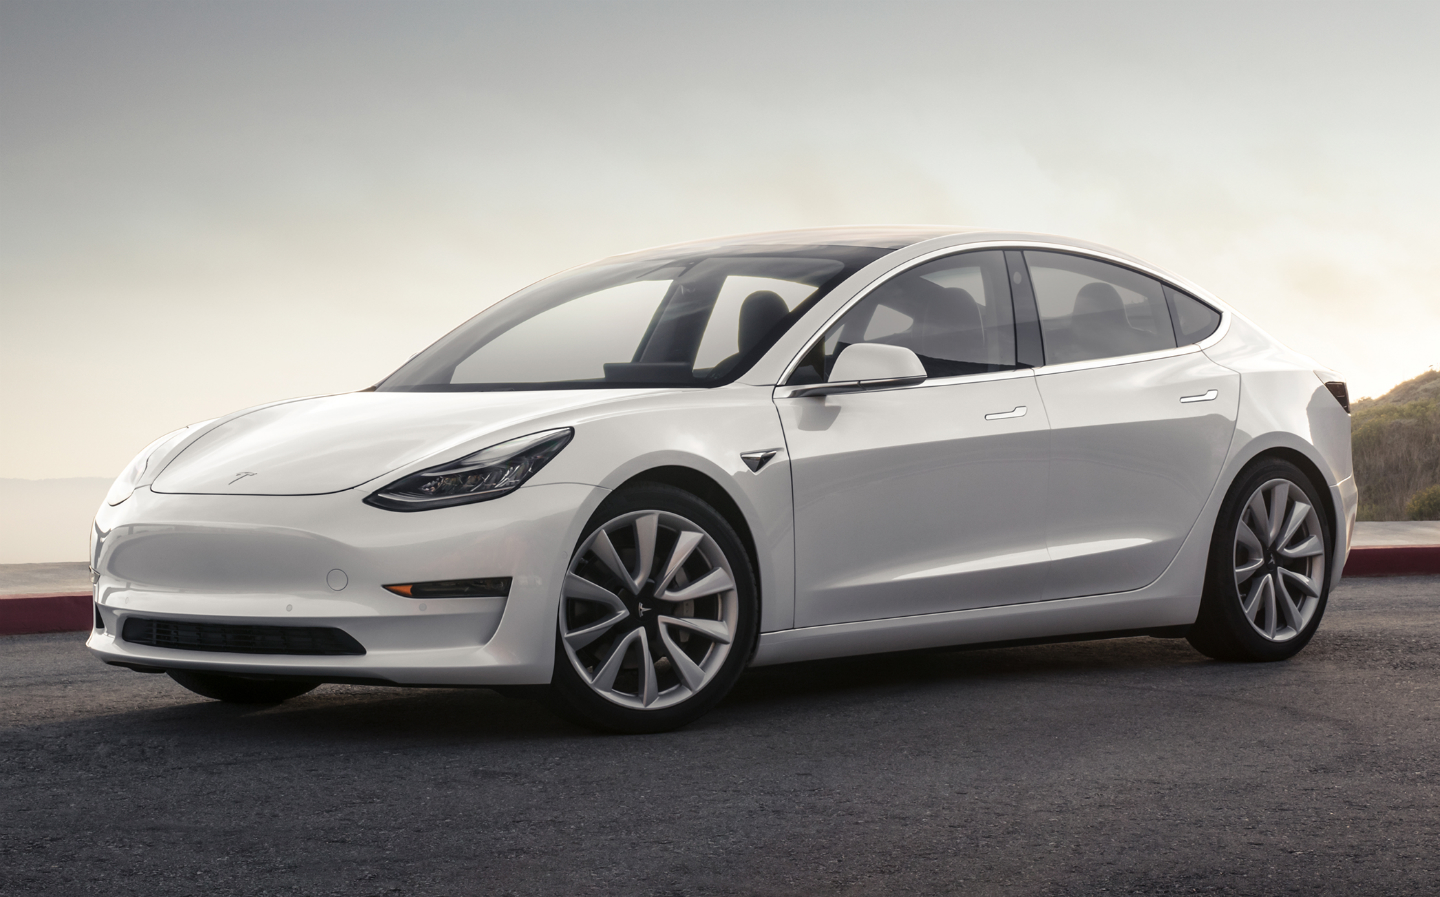 Sunday Times Motor Awards 2019 Best Electric Car of the Year. Tesla Model 3